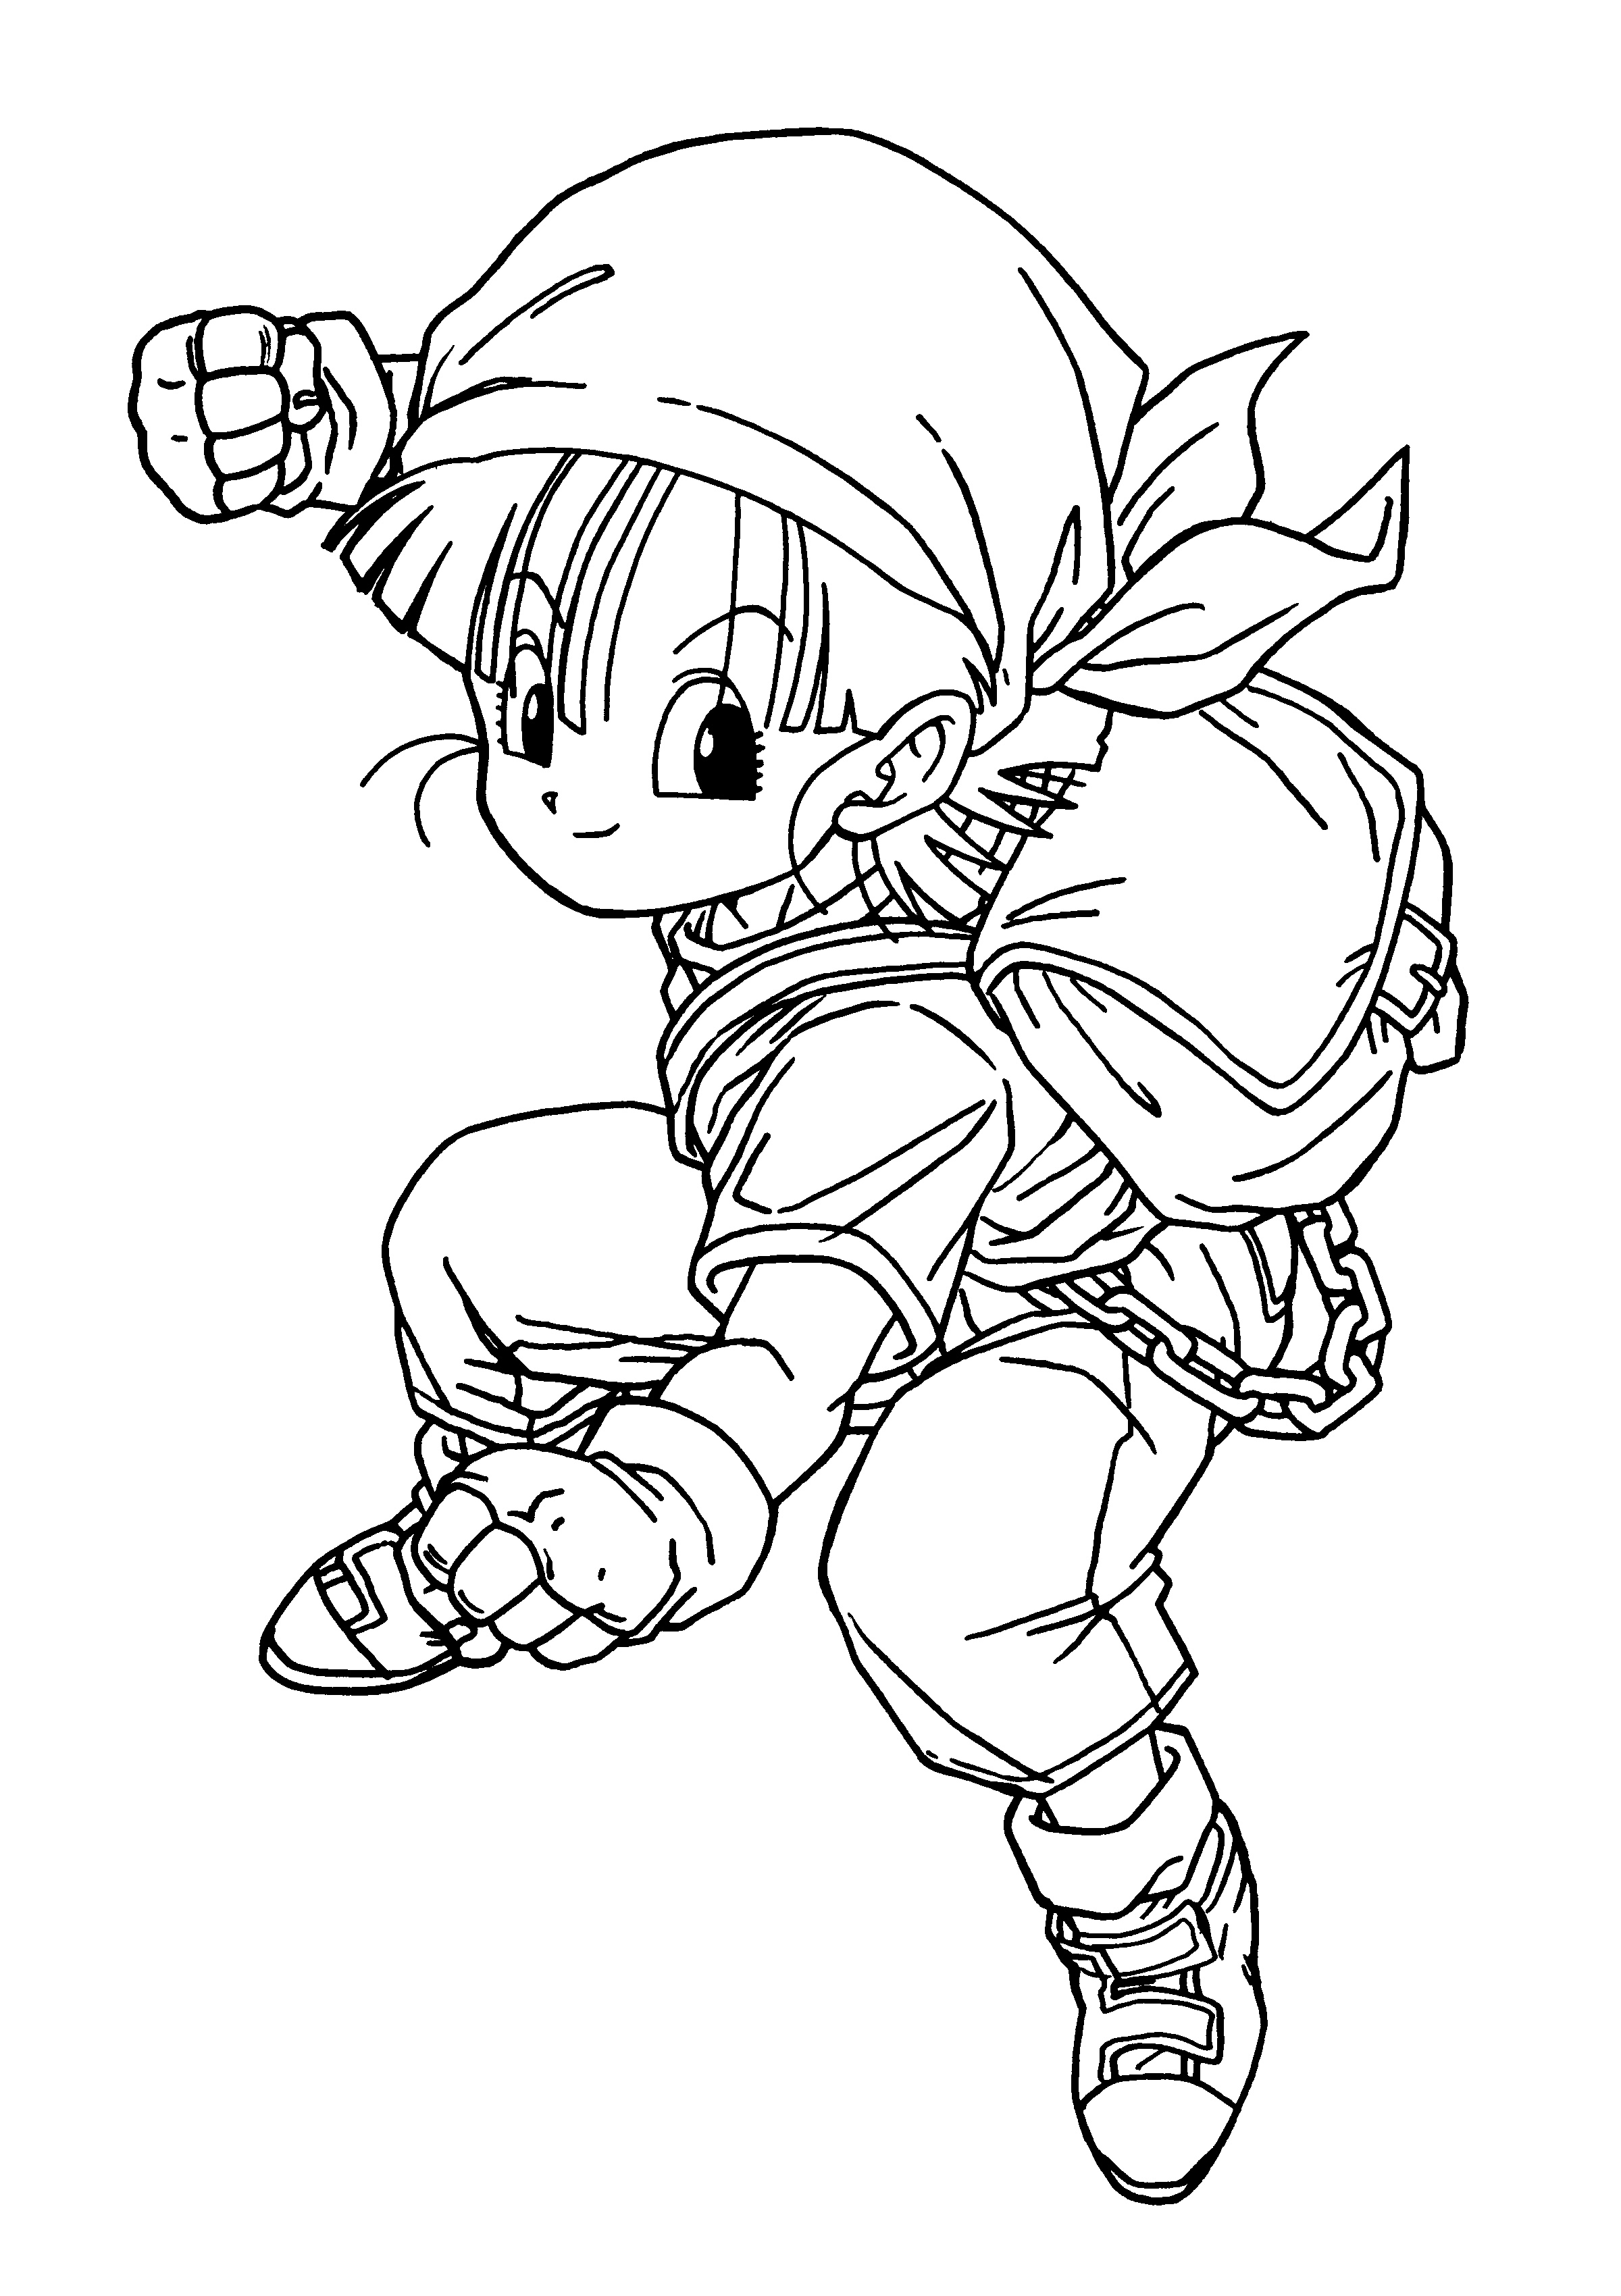 Dragon A Colorier Beau Collection Dragon Ball Coloring Pages Best Coloring Pages for Kids